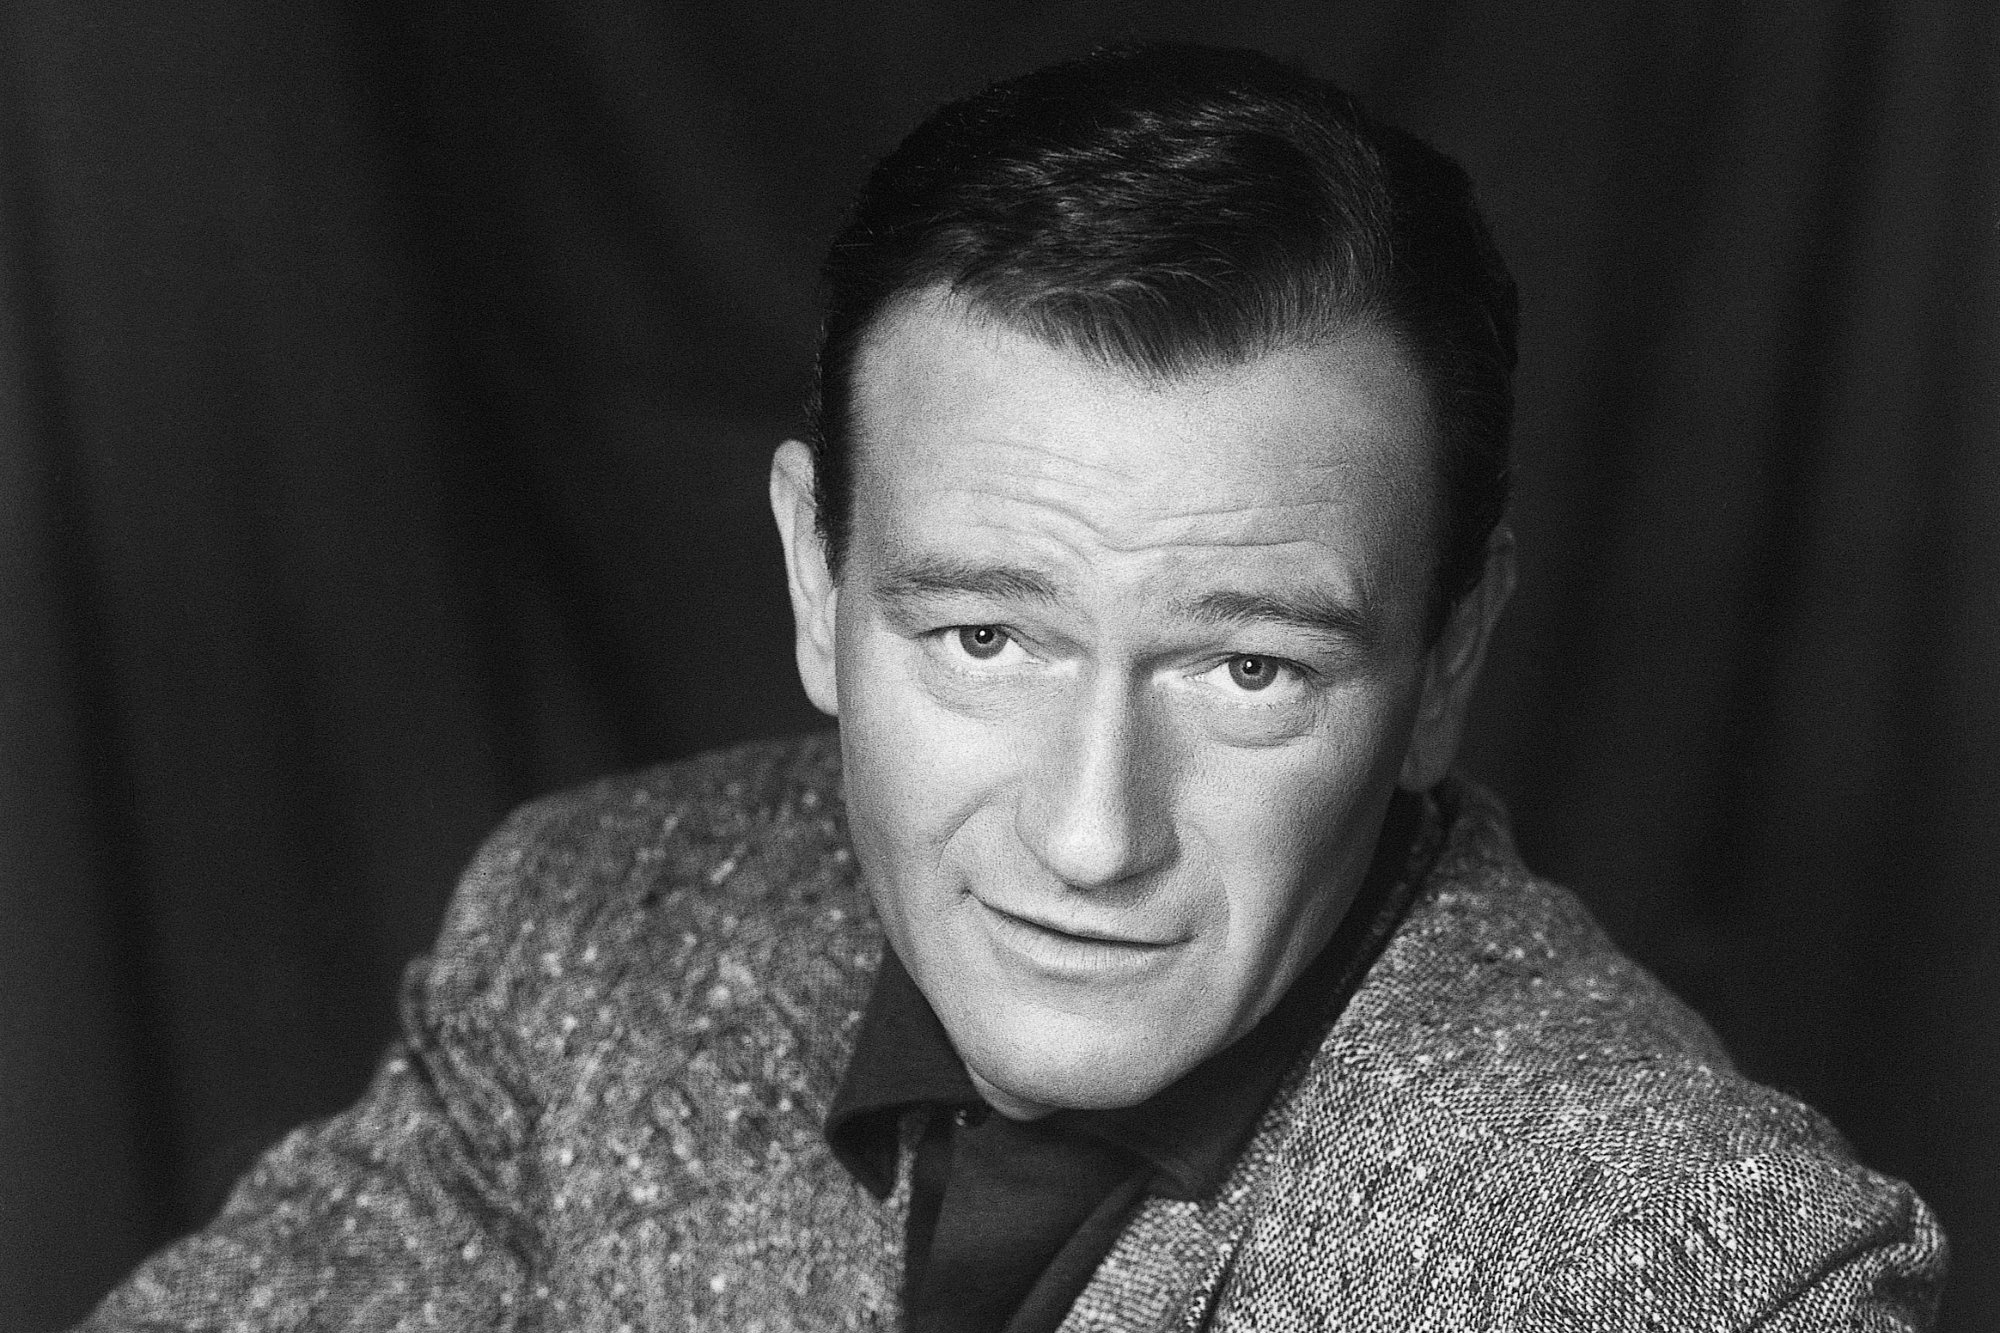 Movie star John Wayne seated, facing the back of the couch on which he is seated